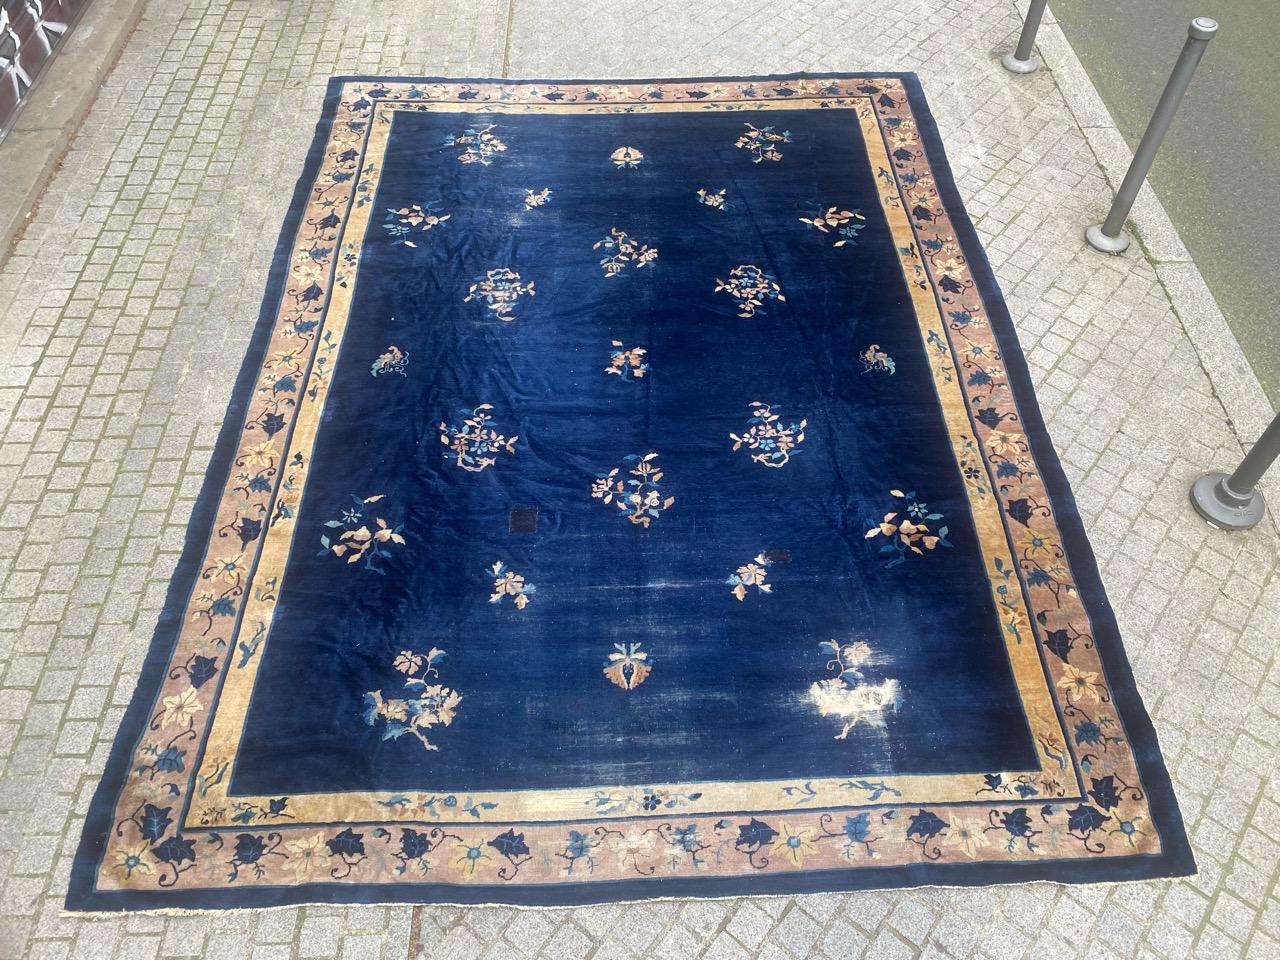 Nice late 19th century Chinese rug with beautiful Chinese and Art Deco design and beautiful natural colors, entirely hand knotted with wool velvet on cotton foundation.

✨✨✨
